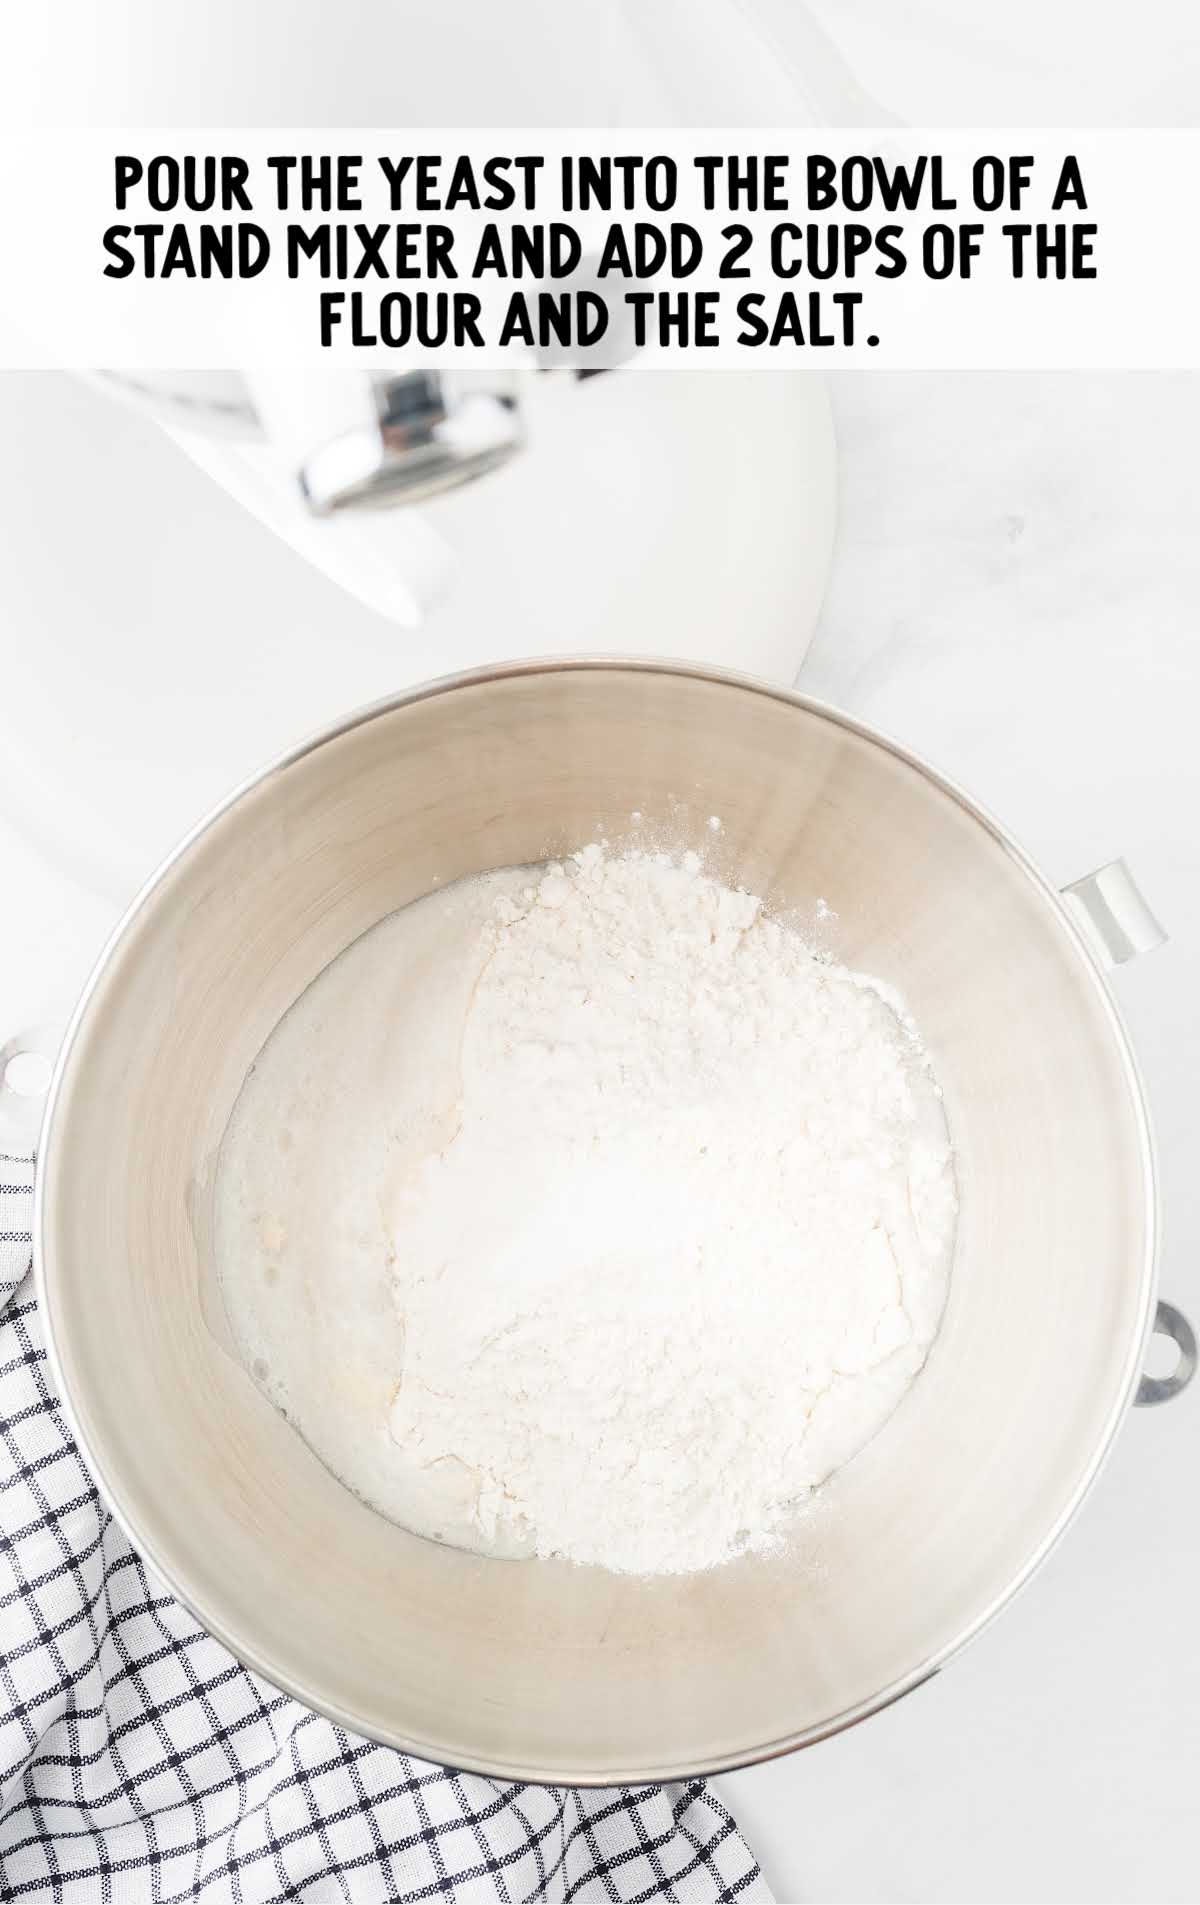 yeast poured into a bowl and mixed with flour and salt